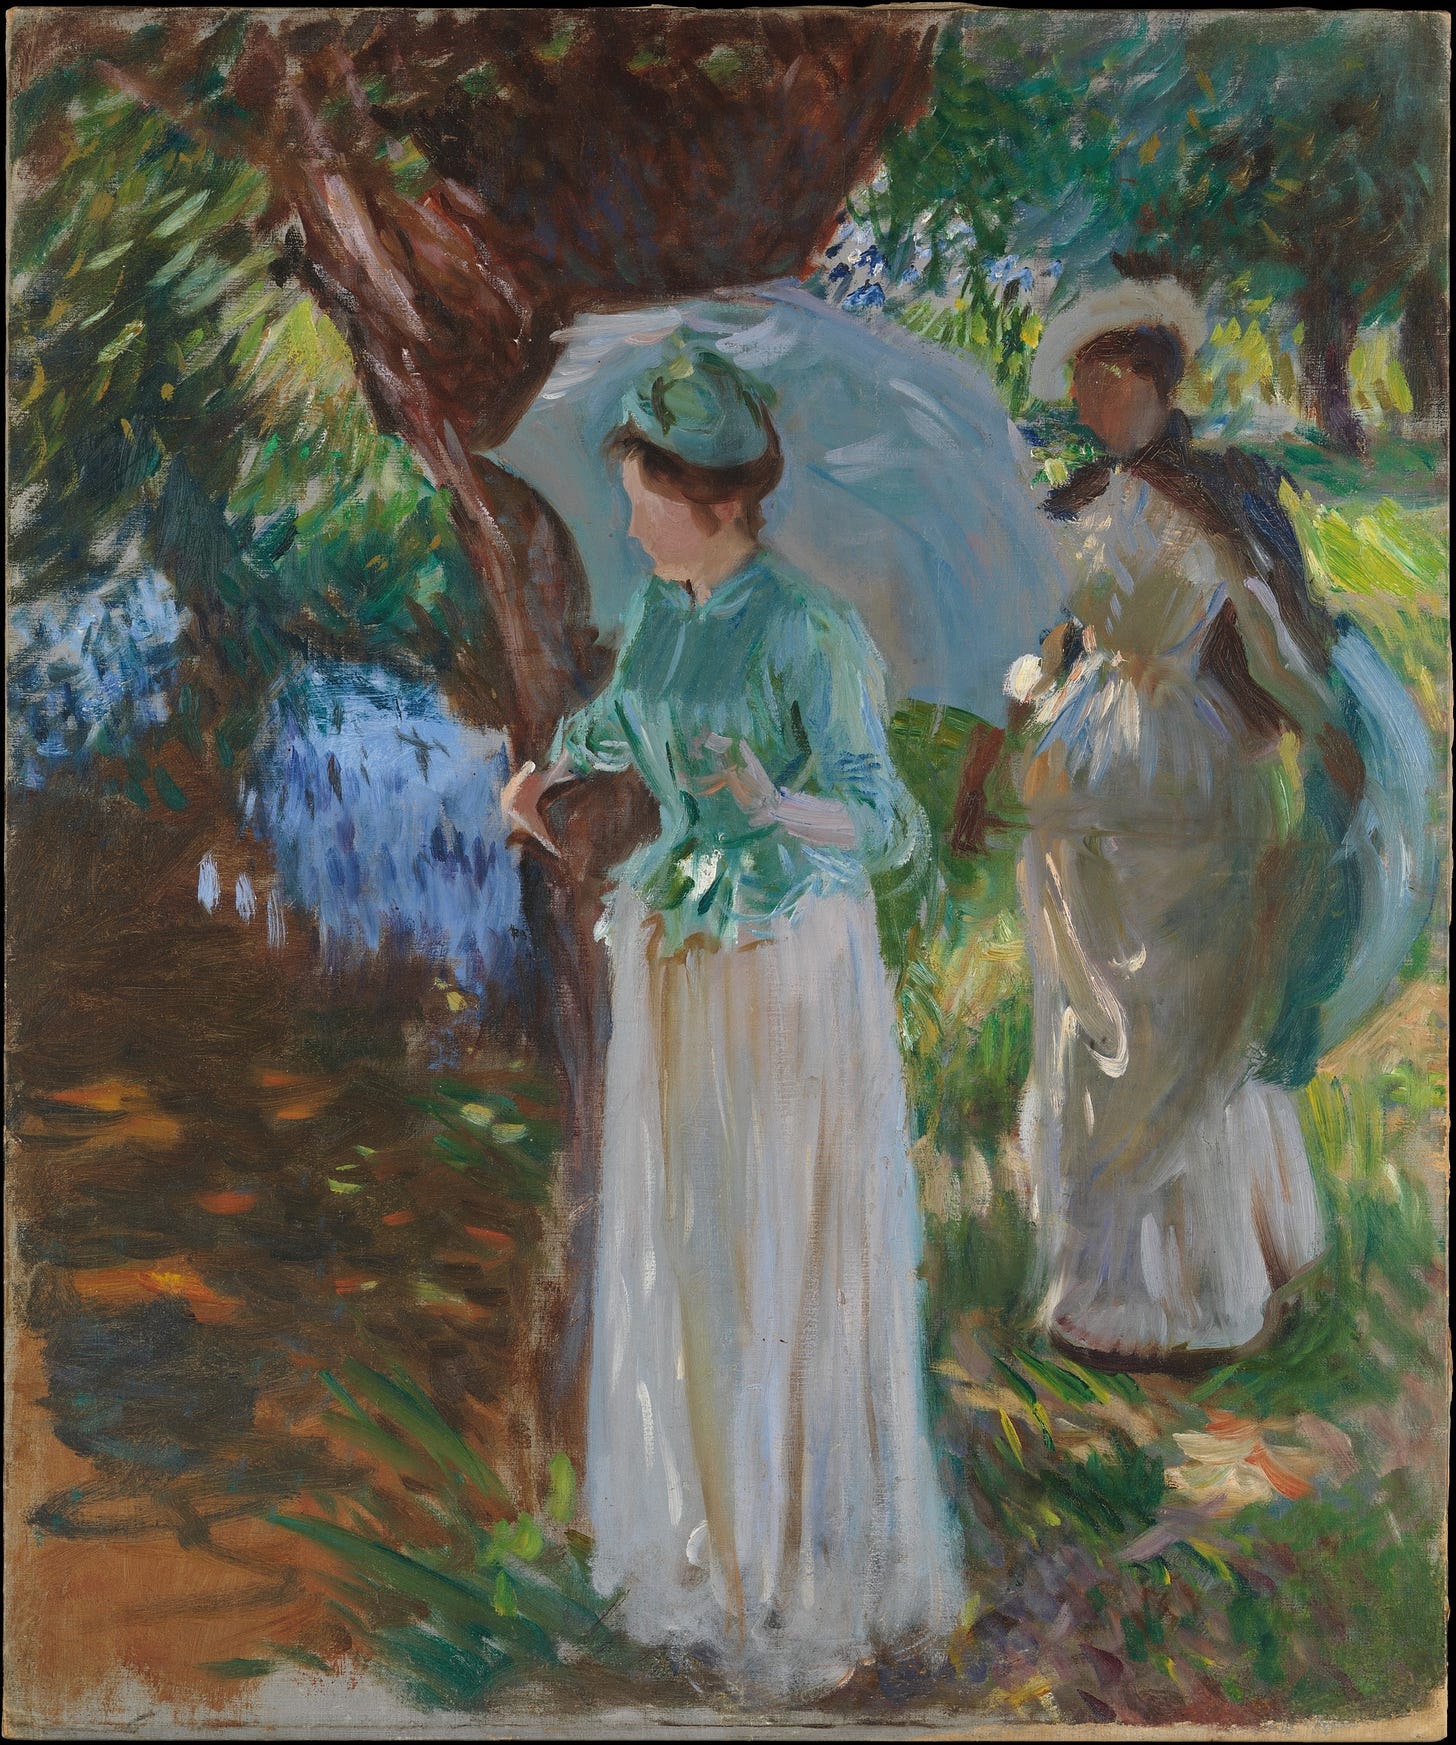 Two Girls with Parasols (1888)